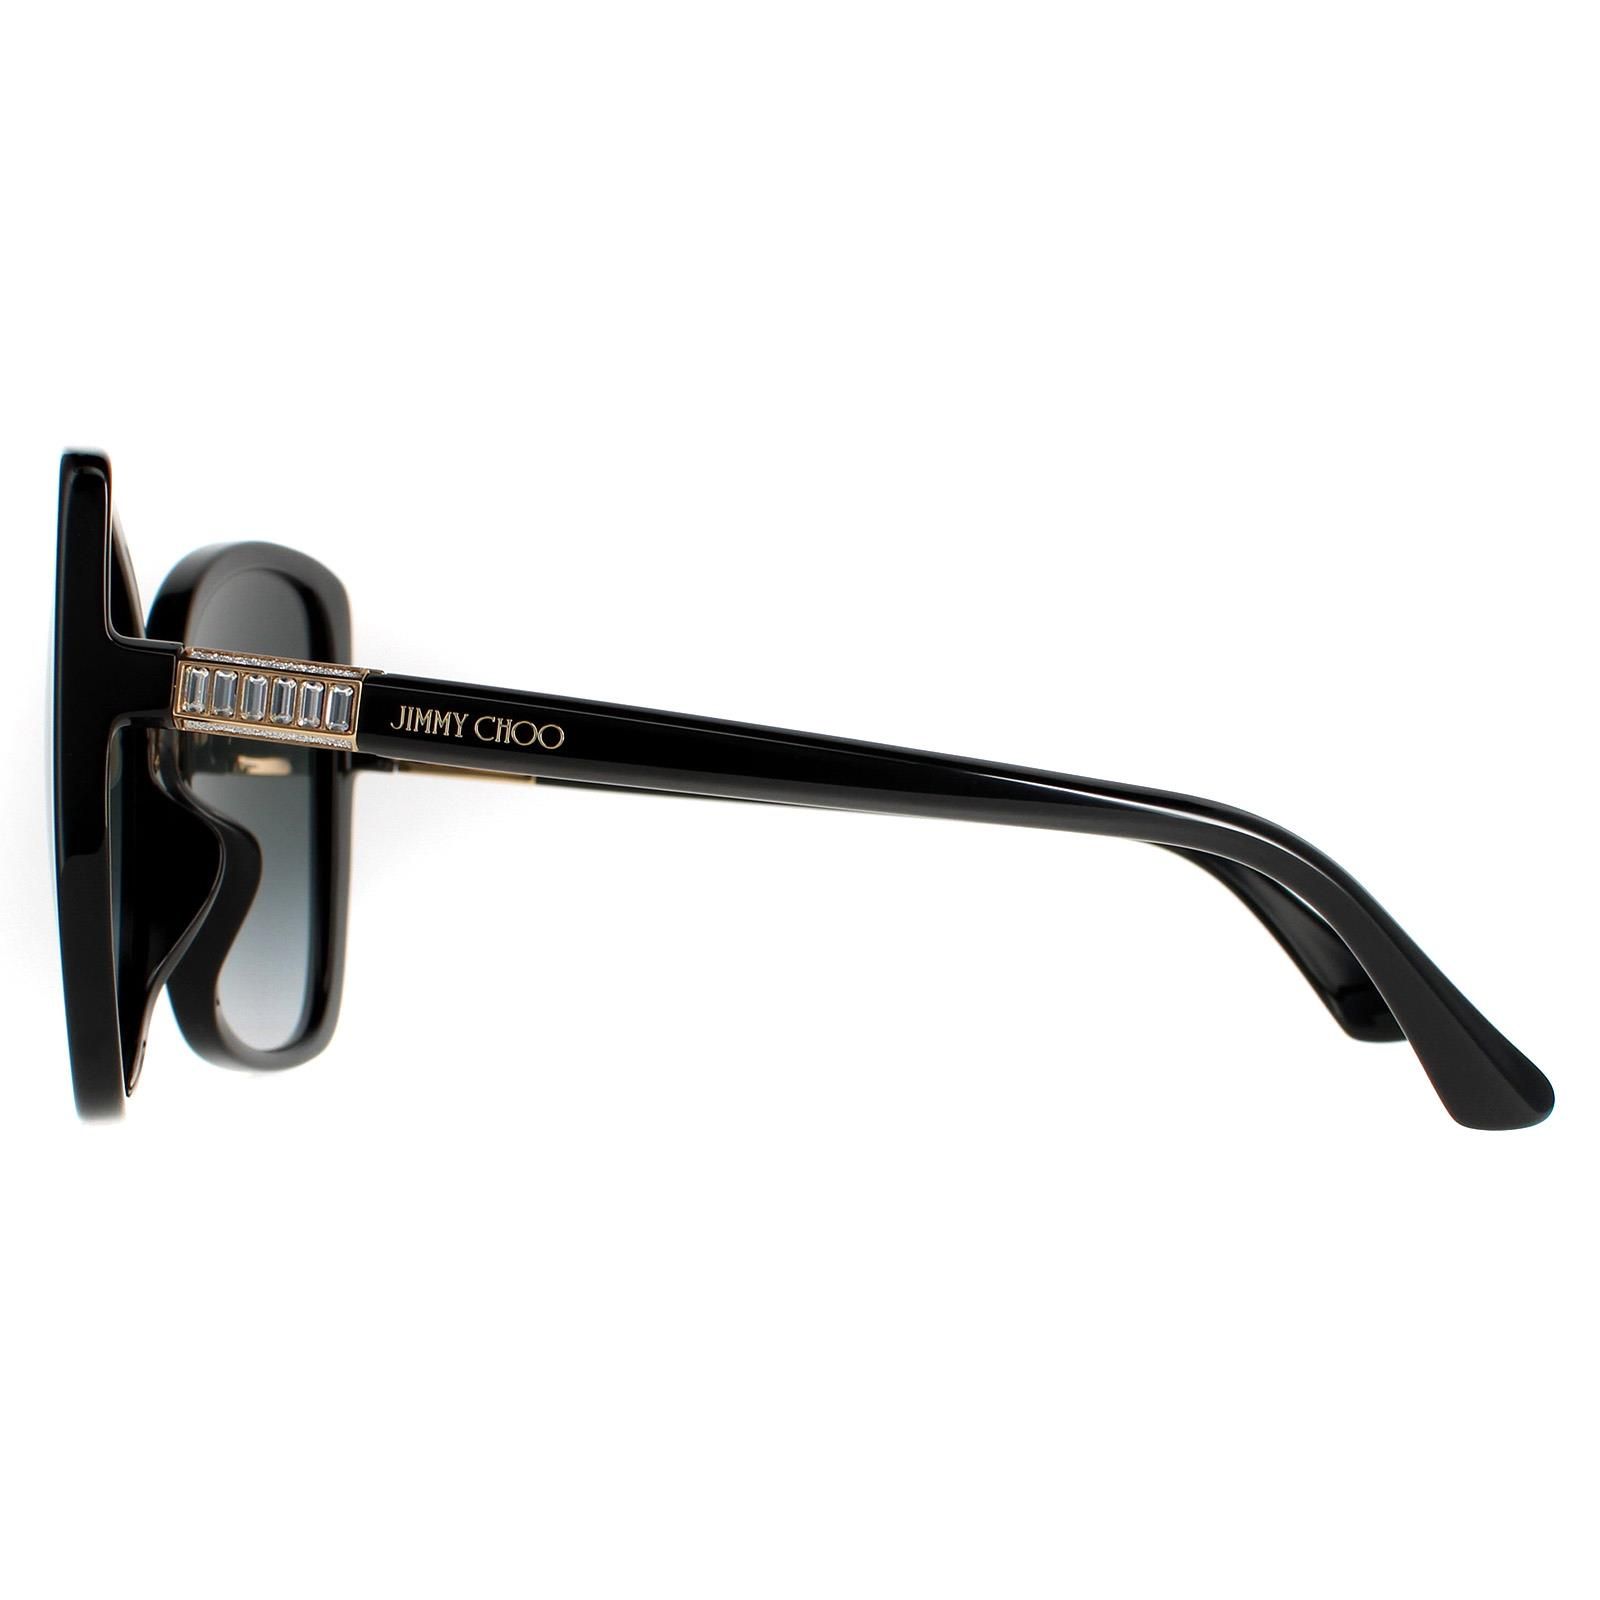 Jimmy Choo Butterfly Womens Black Dark Grey Gradient BECKY/F/S  Jimmy Choo are a oversized butterfly style crafted from lightweight acetate. Slender temples are embellished with the Jimmy Choo logo for authenticity.